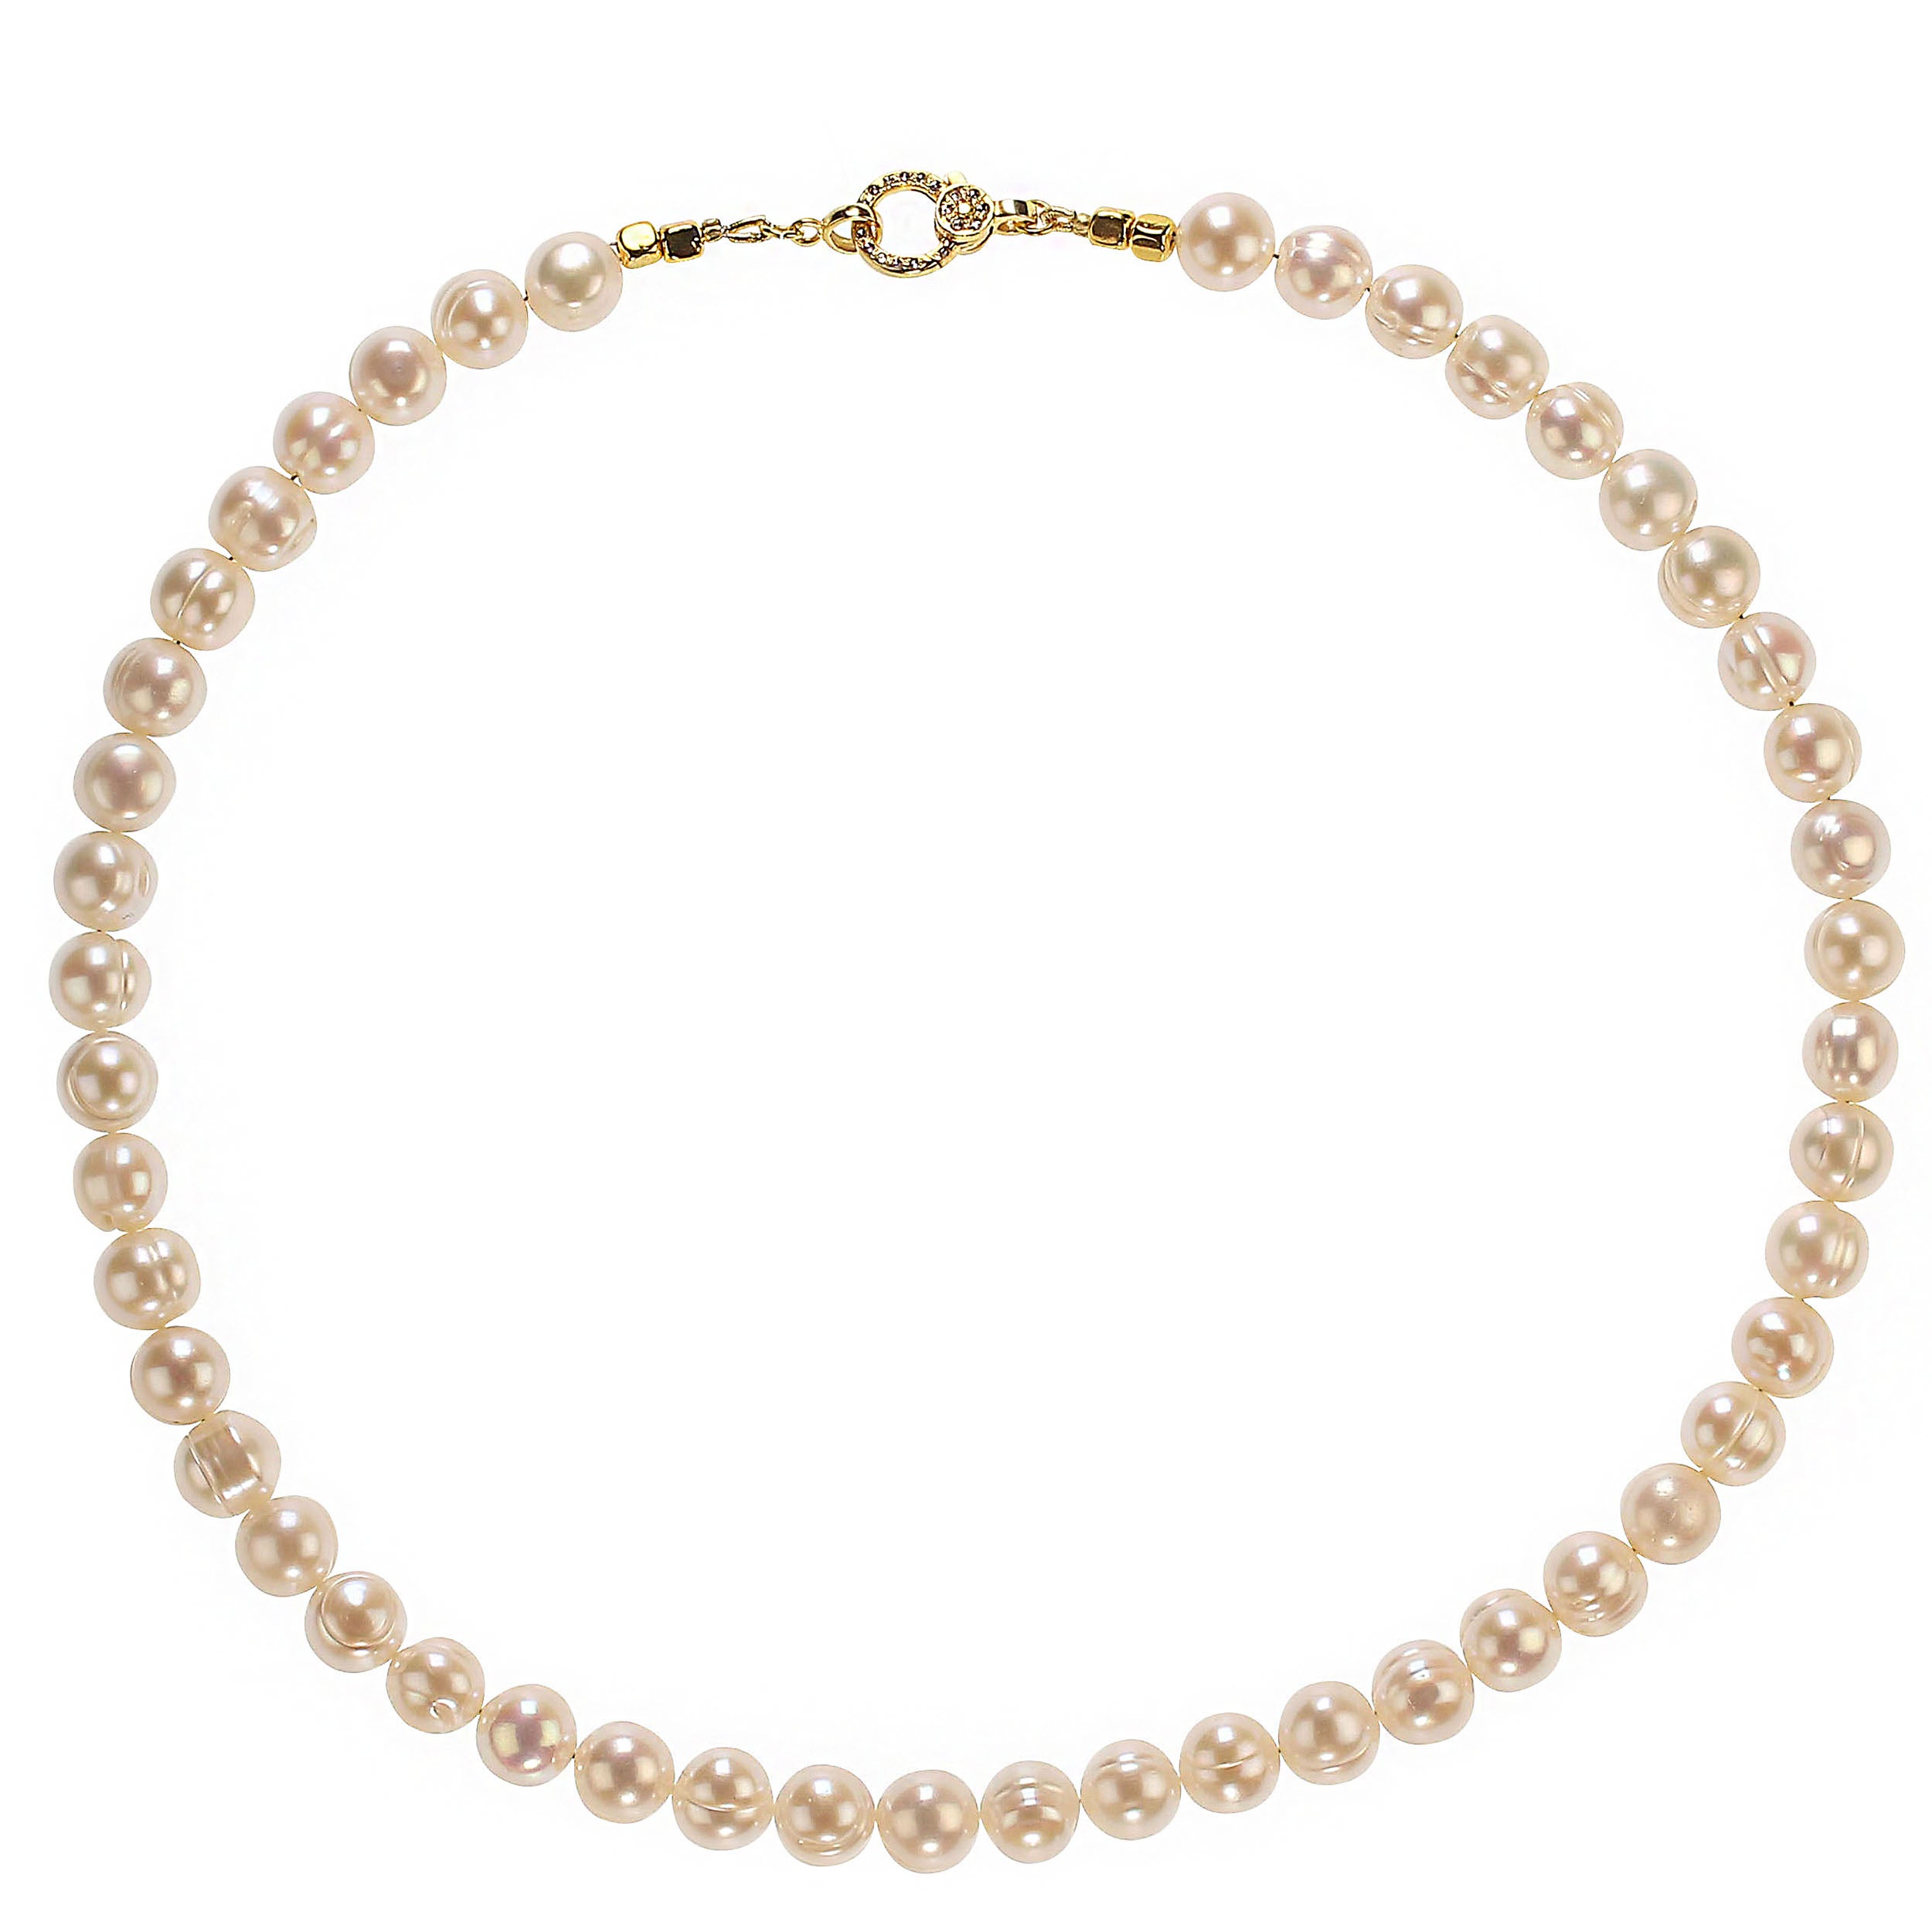 Bead AJD 17 Inch Creamy White 9 MM Pearl Necklace Perfect Gift 